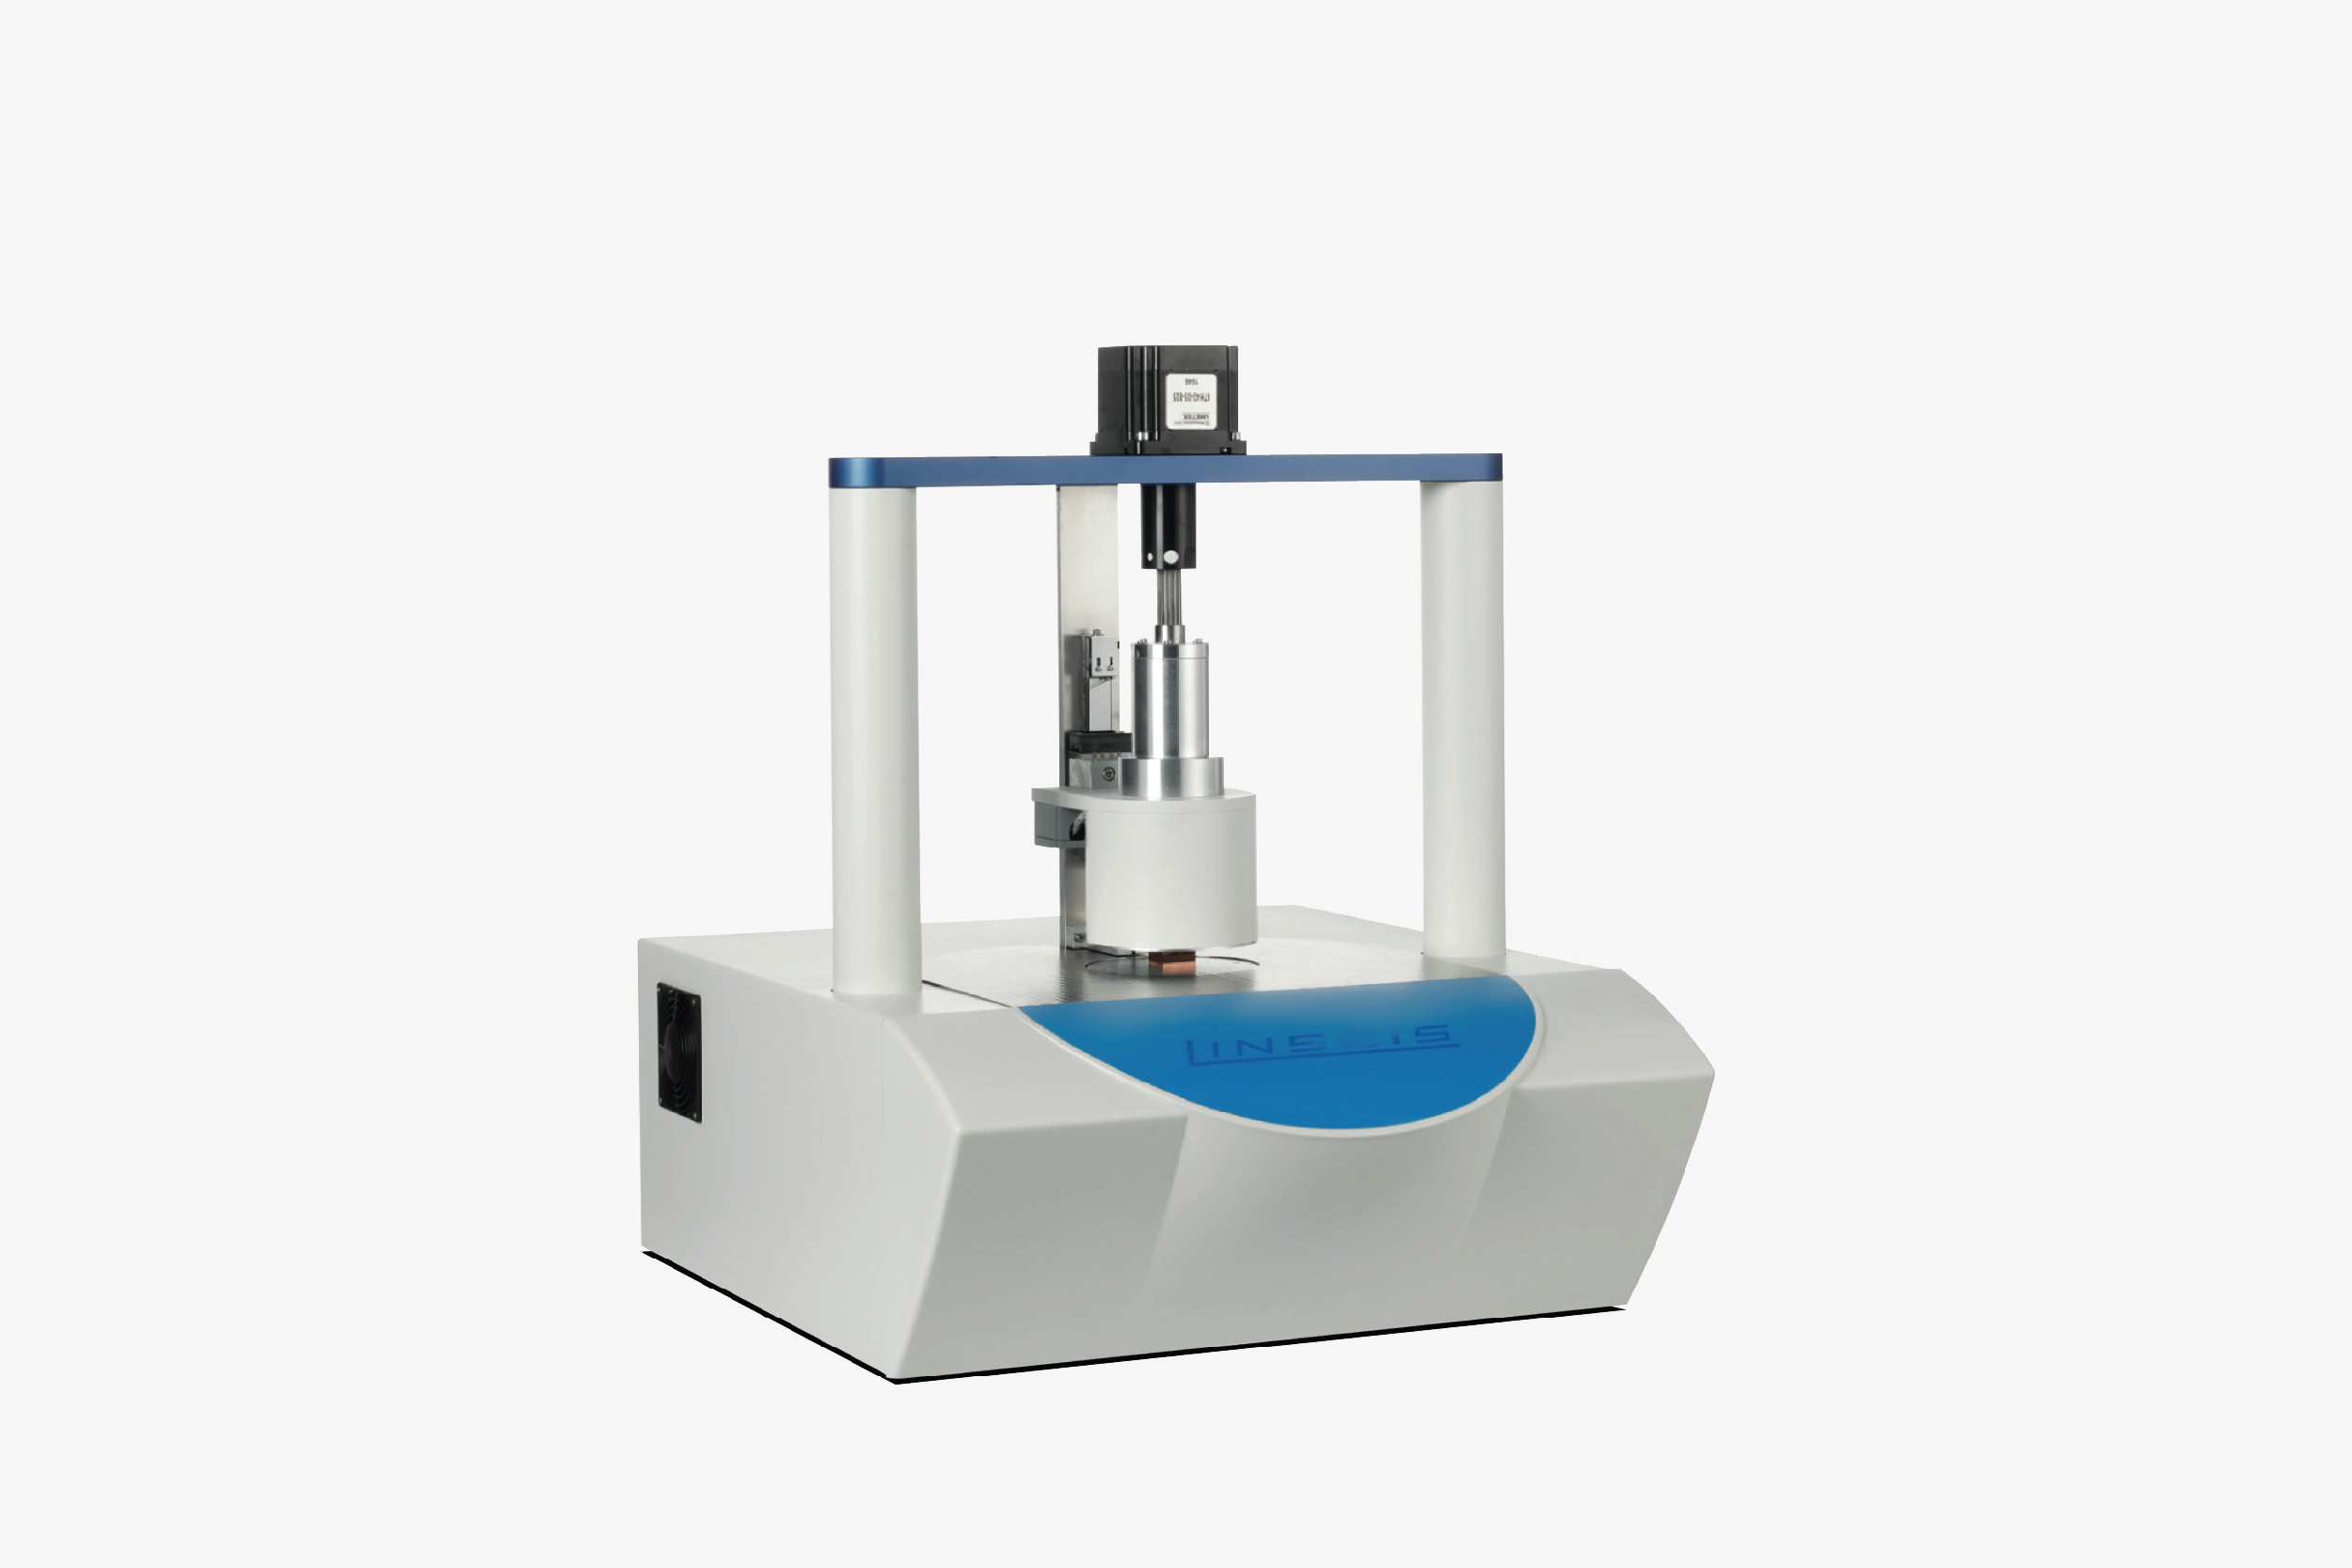 Thermal Interface Materials (TIM) Tester